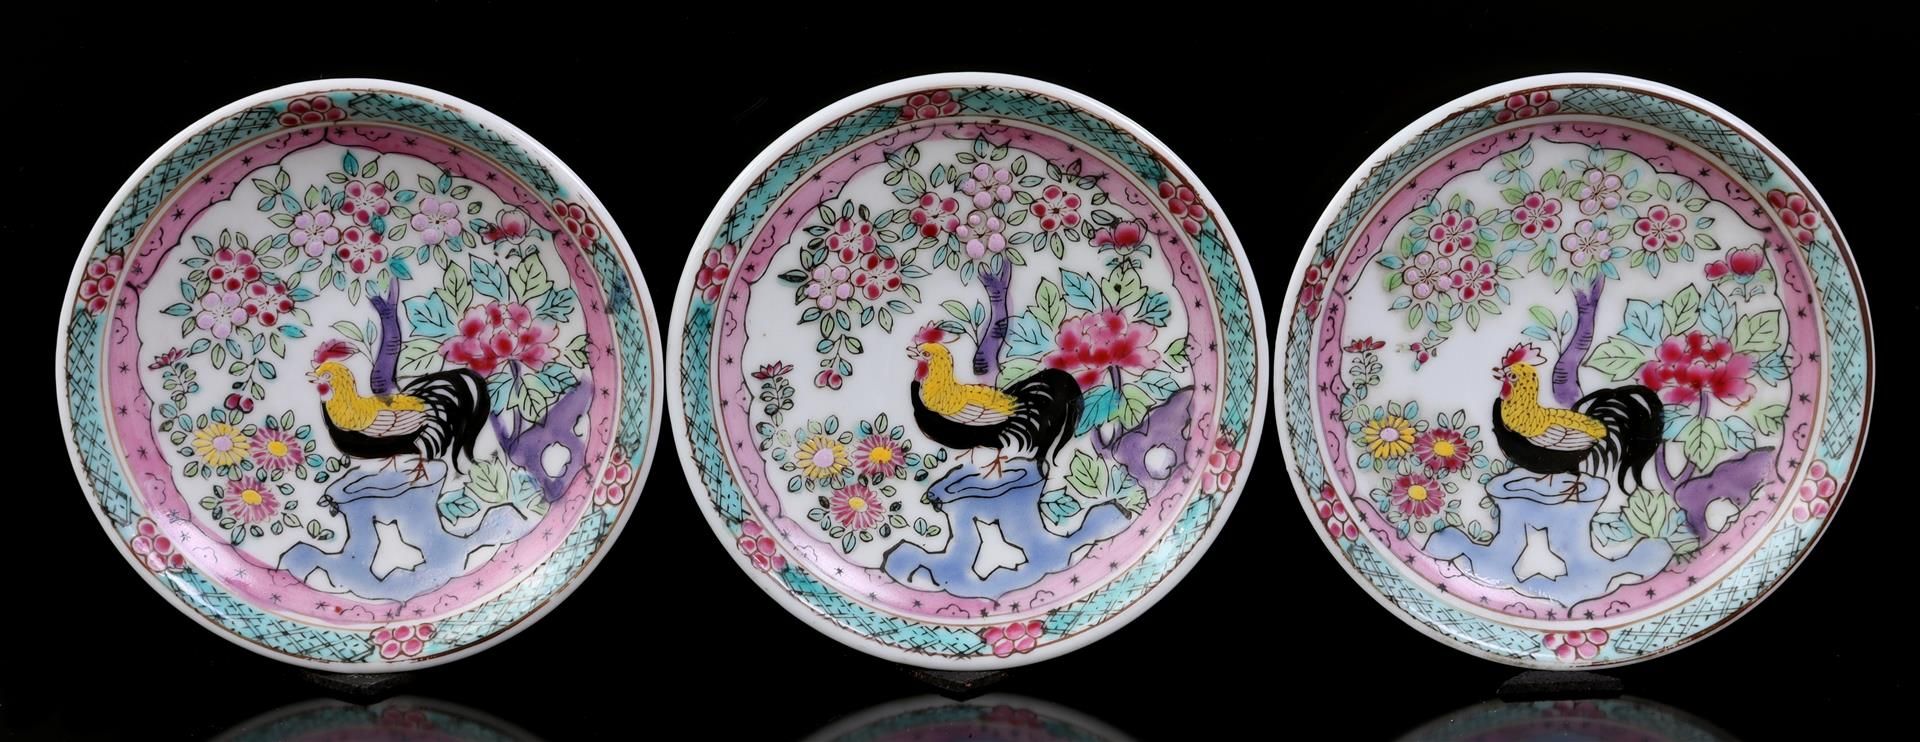 3 porcelain bowls on saucer, decor roosters in landscape, China ca.1775, bowl 3.5 cm high, 6.5 cm di - Image 2 of 3